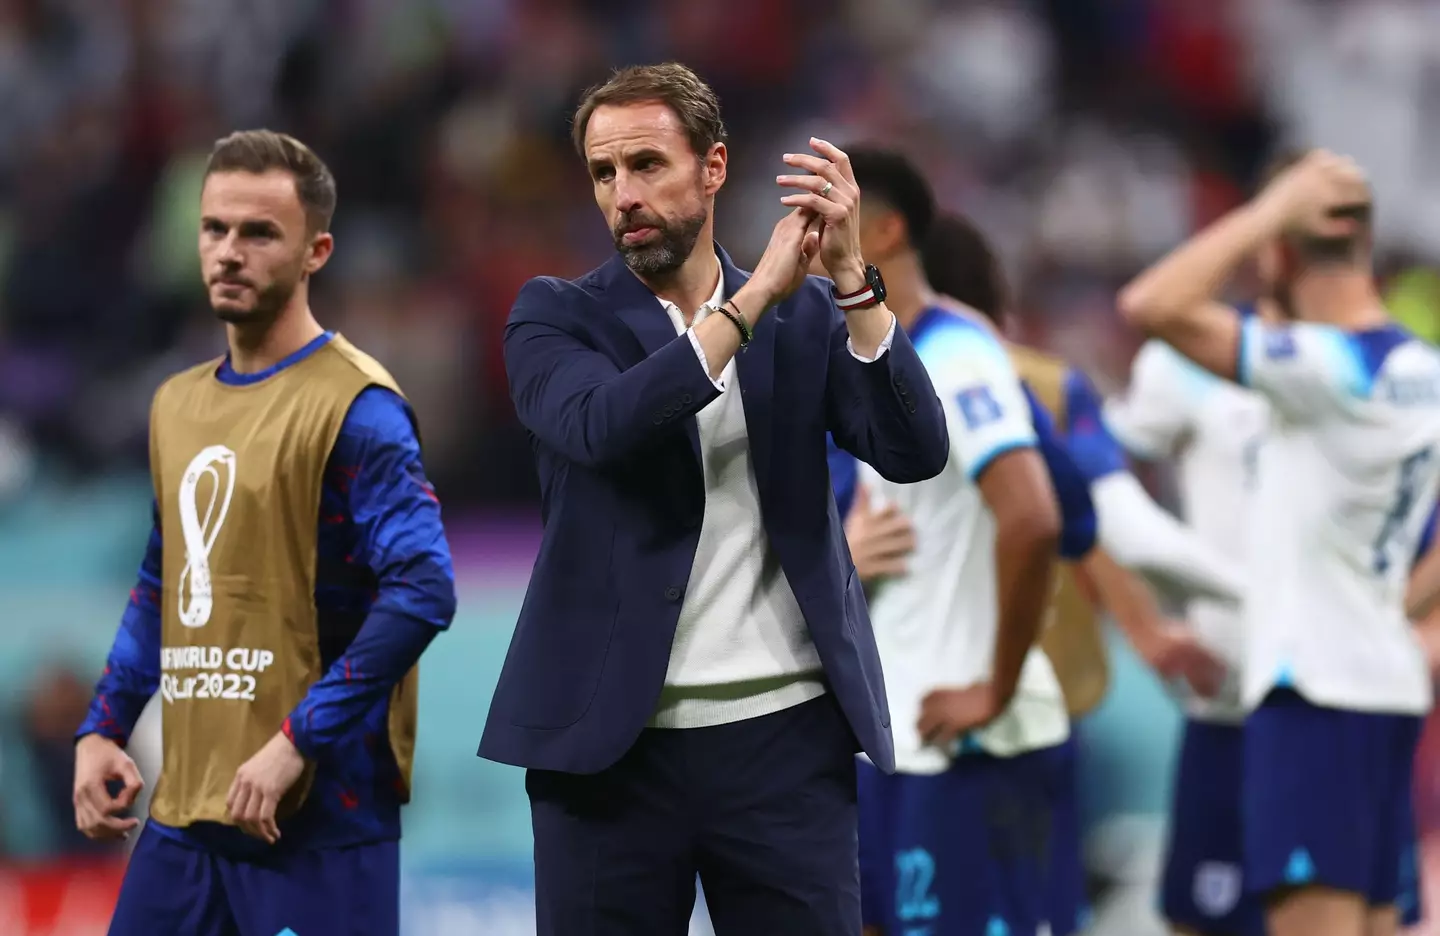 Southgate at this year's World Cup. (Image